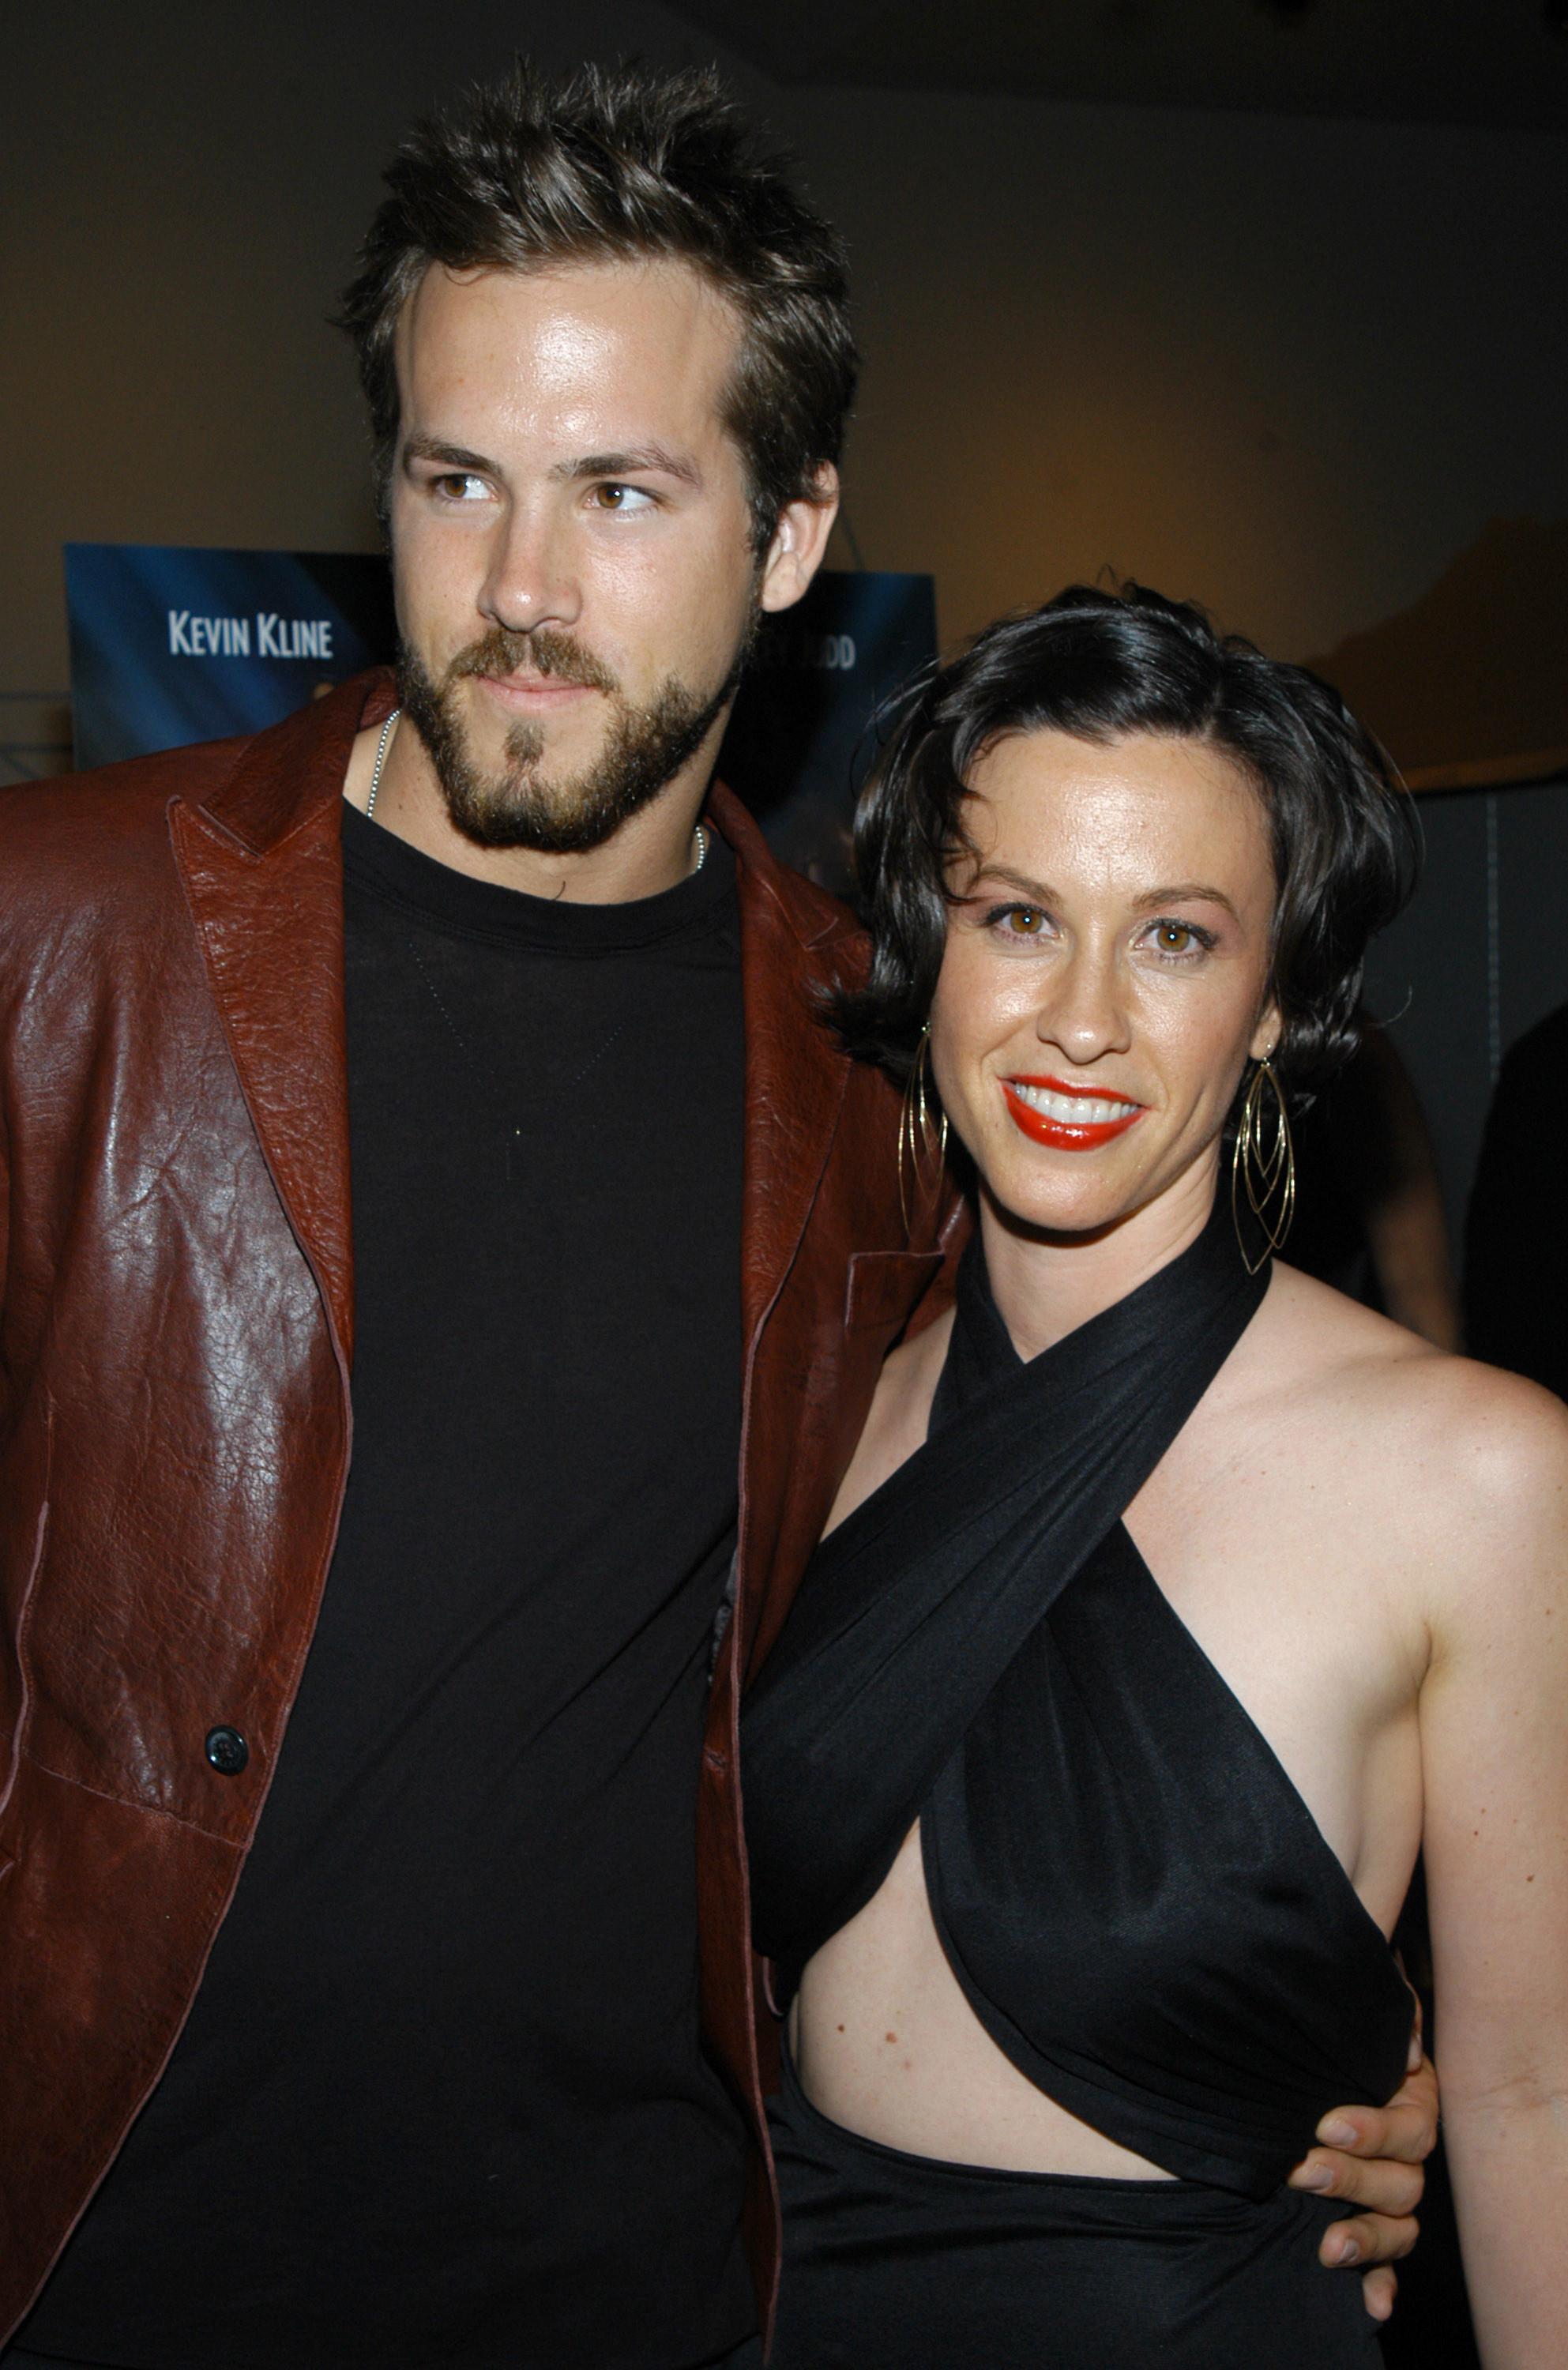 Ryan Reynolds wearing a leather jacket as he stands with his arm around Alanis Morissette, who&#x27;s wearing a halter top at a premiere